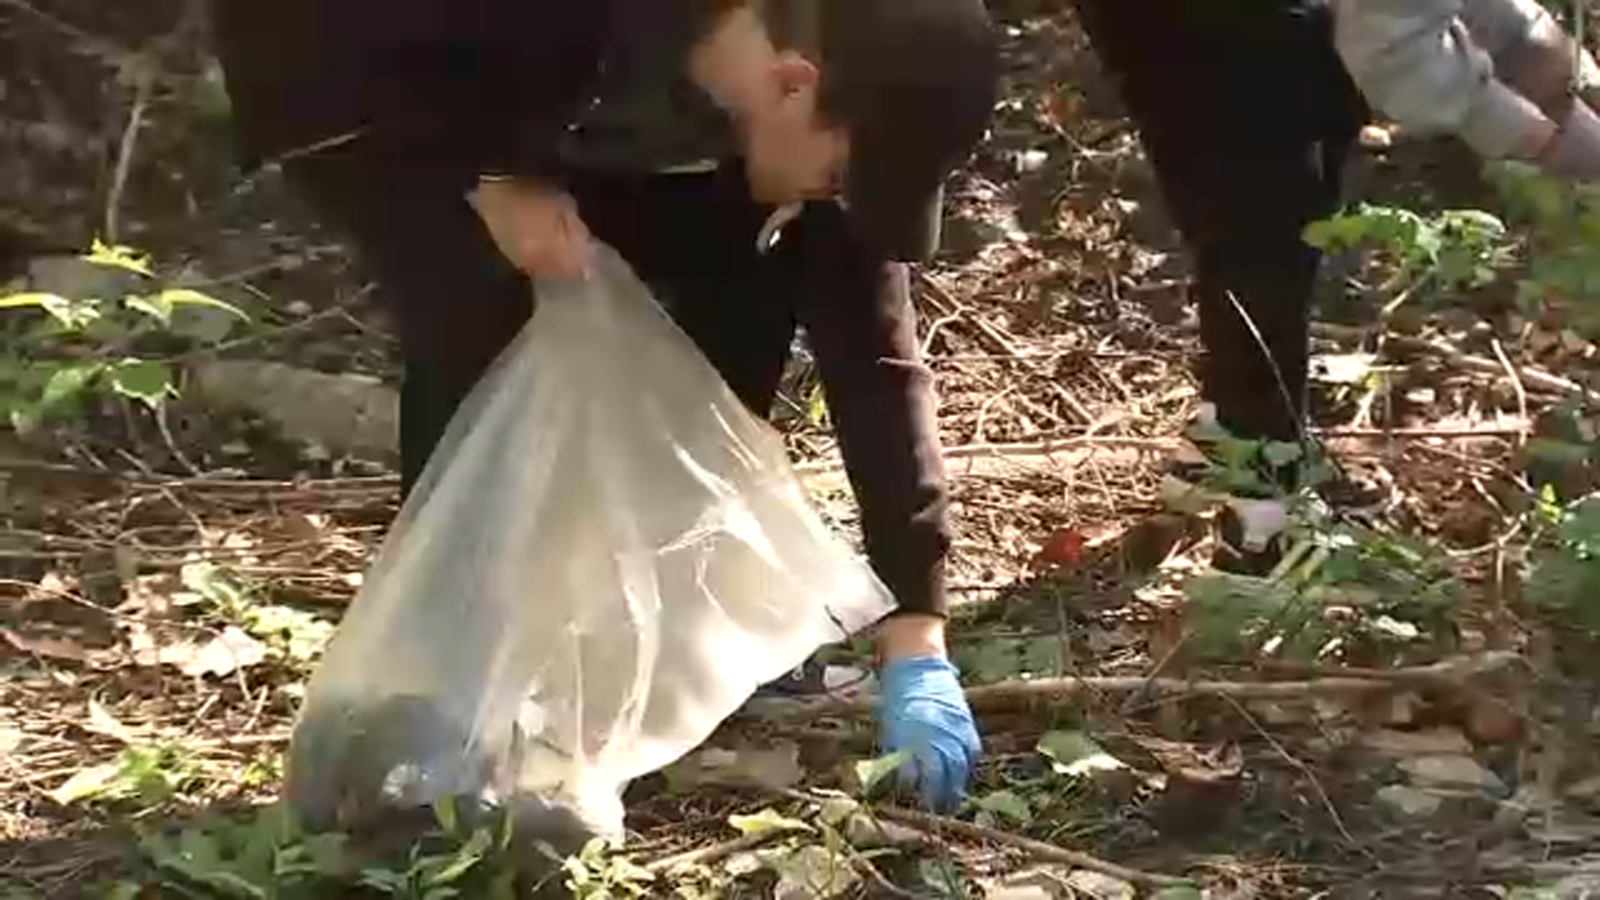 Friends of the Chicago River organize clean-up for 32nd Chicago River Day at Canal Origins Park, other locations across area [Video]